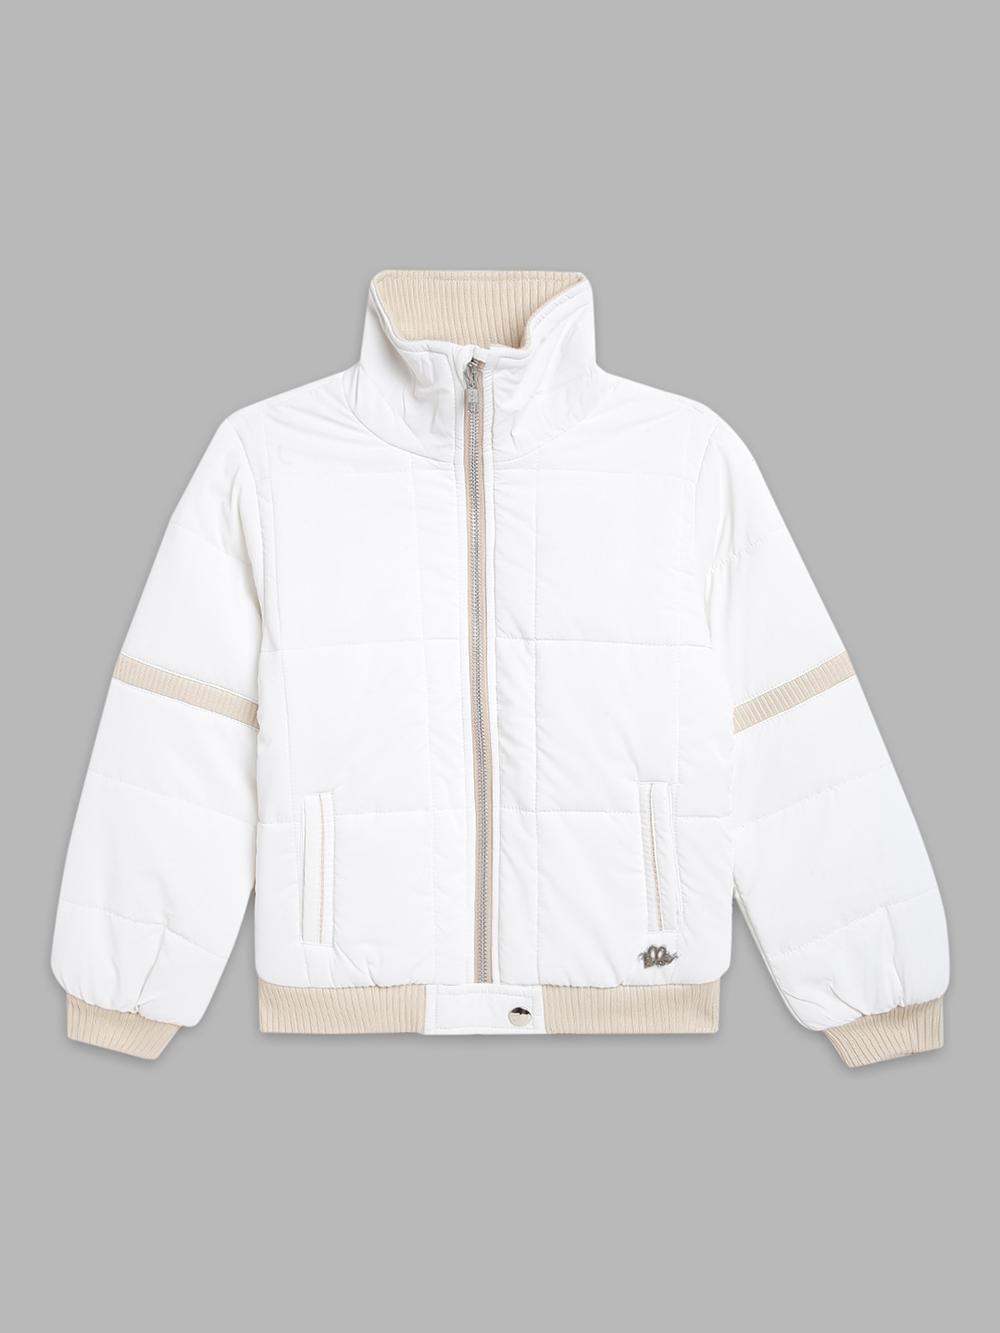 white-solid-collar-jacket